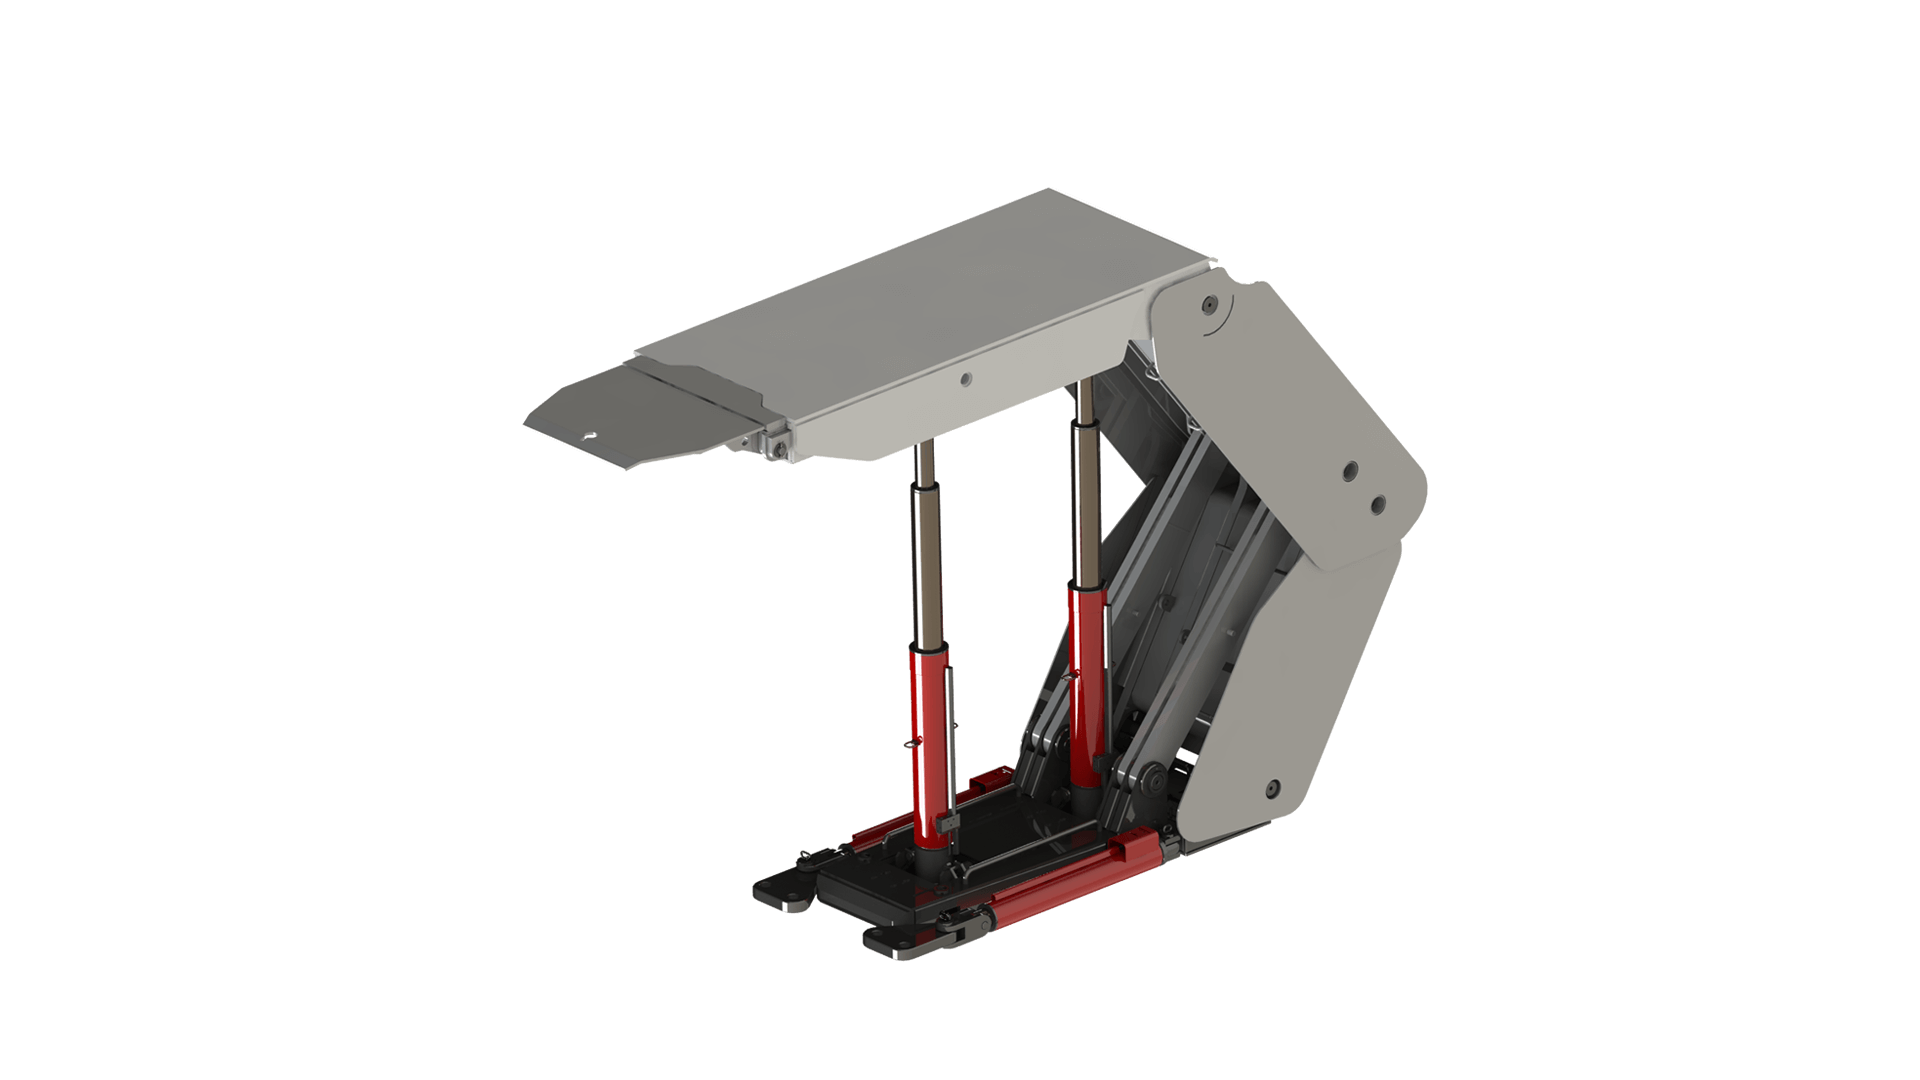 Powered roof supports